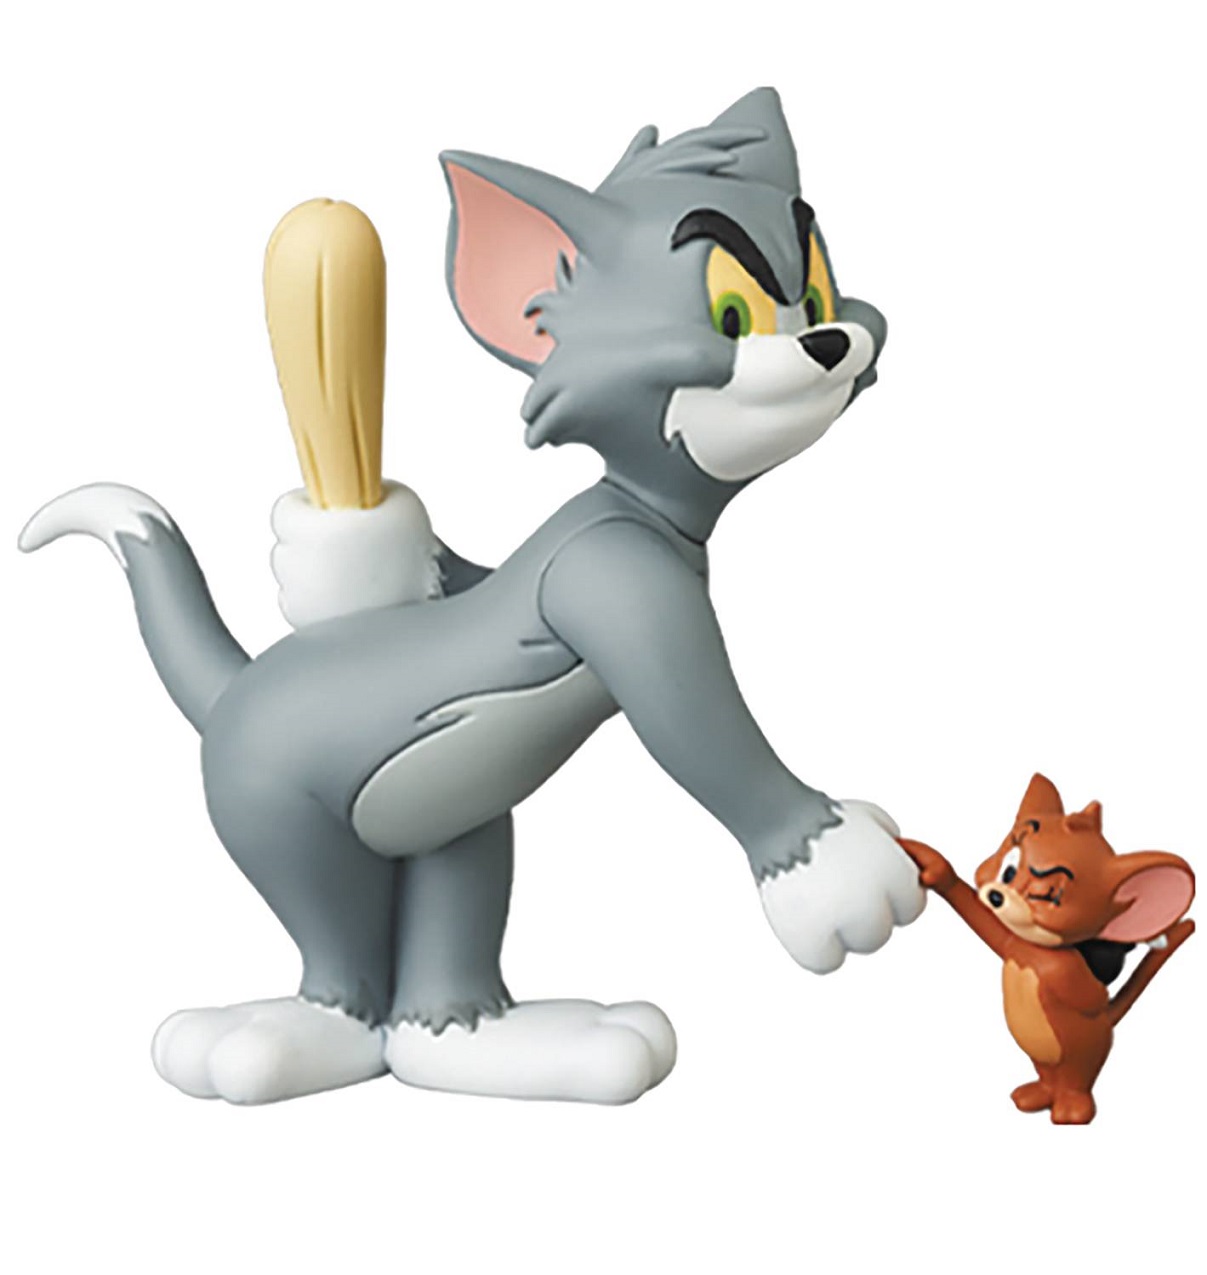 Tom And Jerry "Making Up" UDF Vinyl Figure 